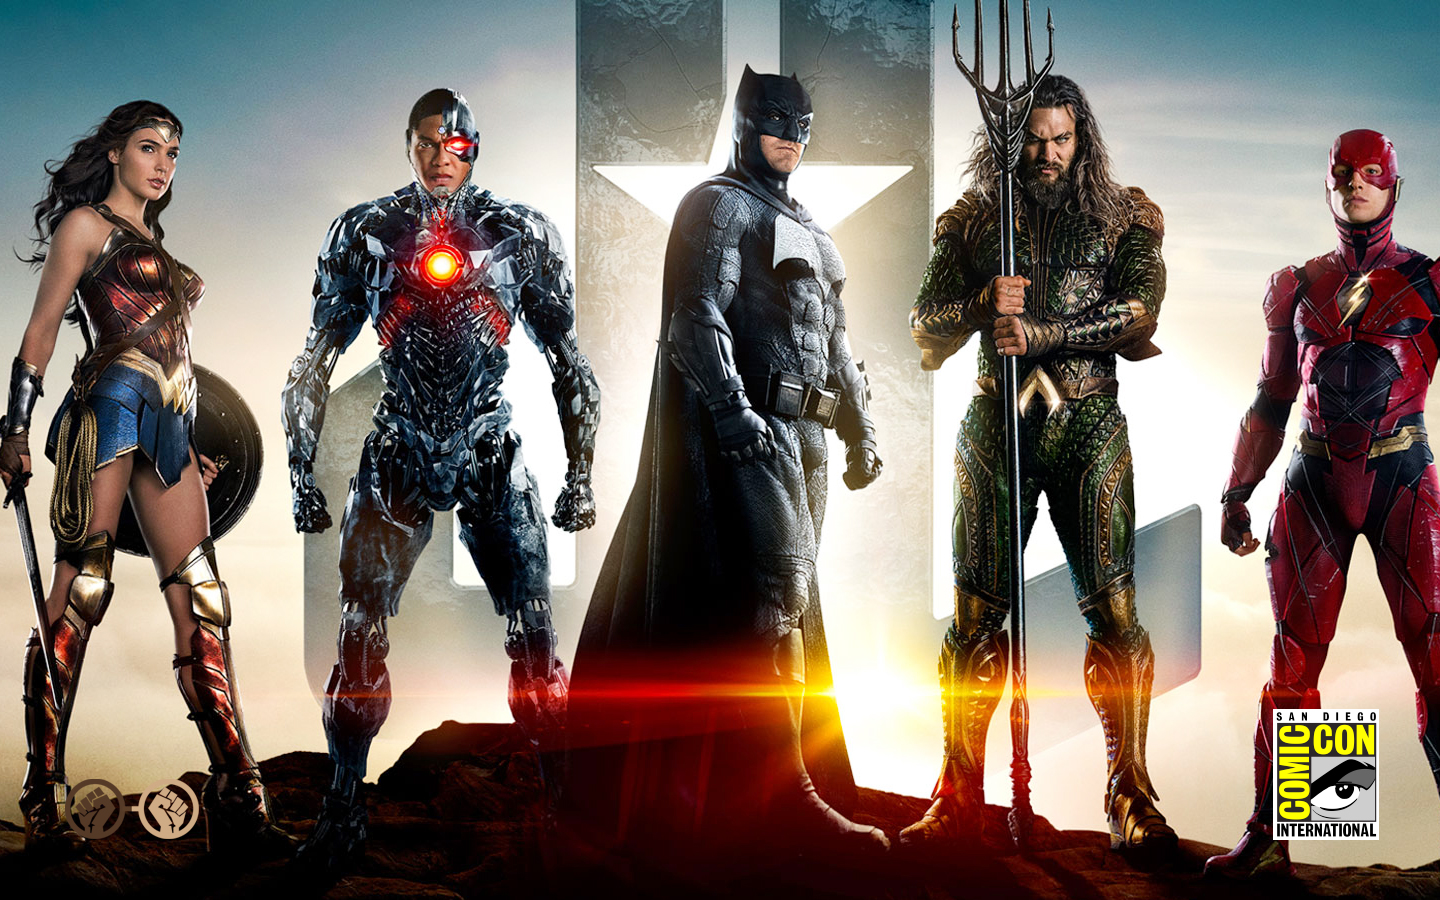 New Footage and Panel Discussion for ‘Justice League’ #SDCC2017